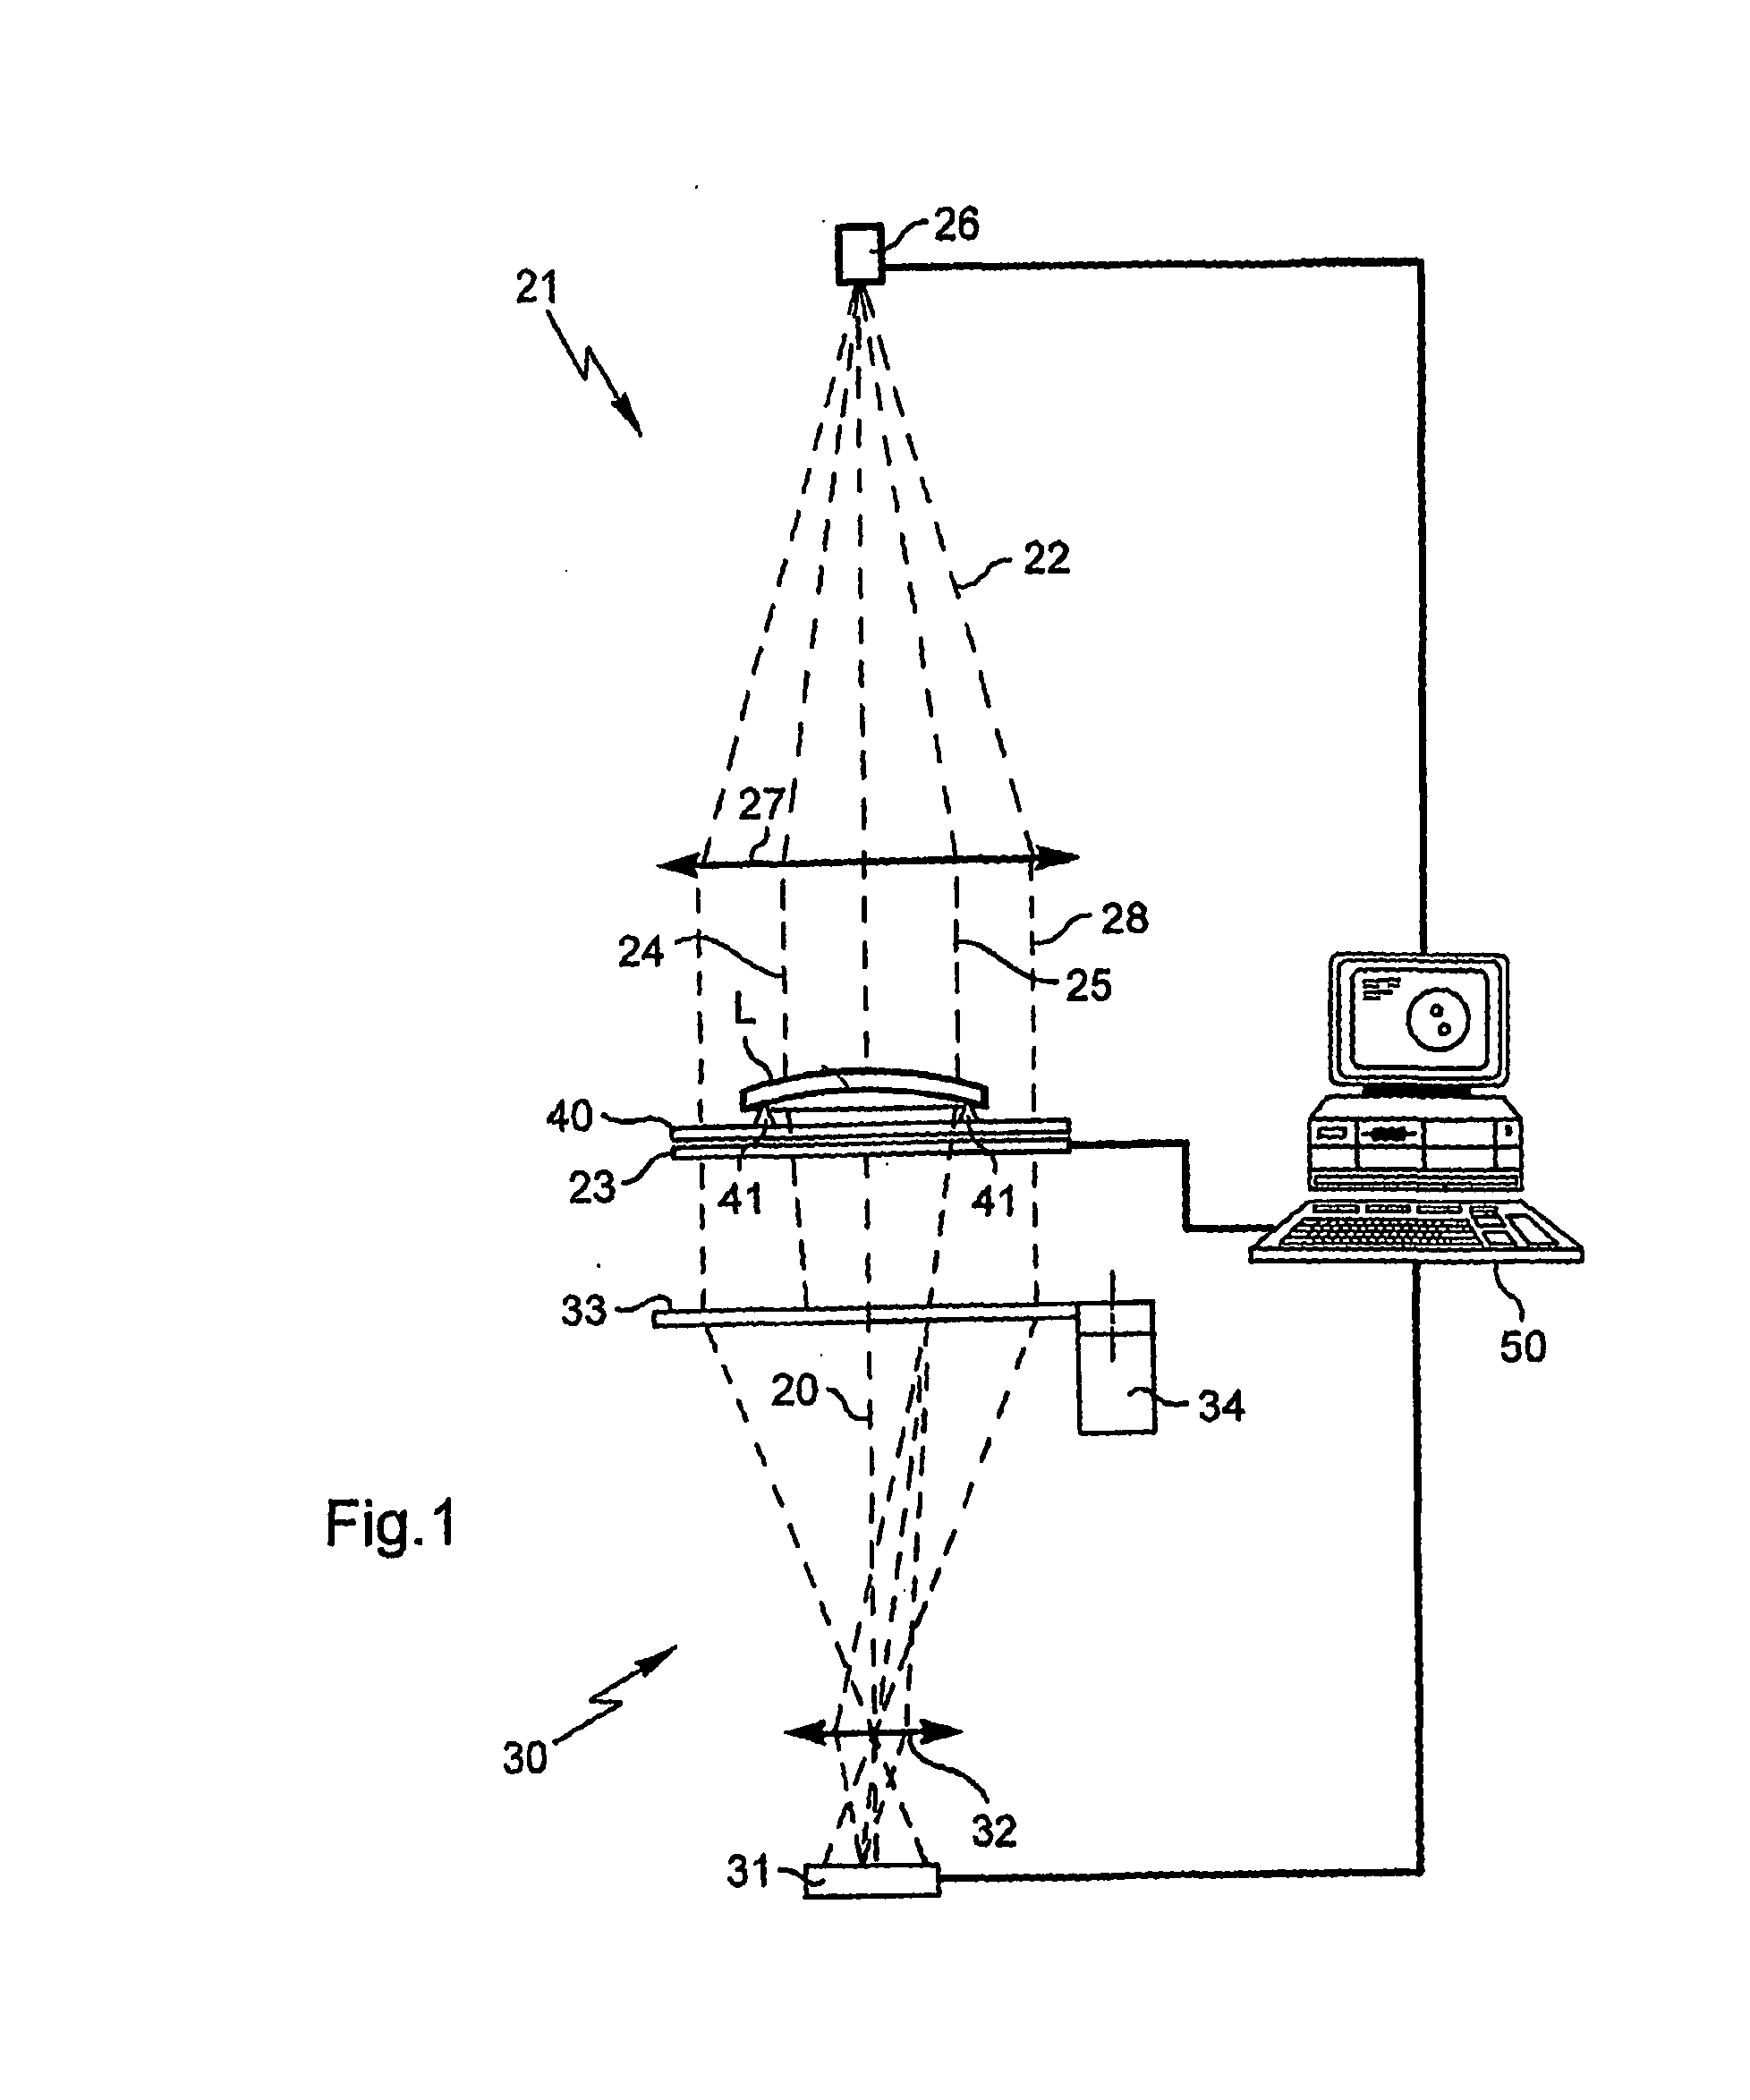 Method And Apparatus For Locally Measuring Refractive Characteristics Of A Lens In One Or Several Specific Points Of Said Lens